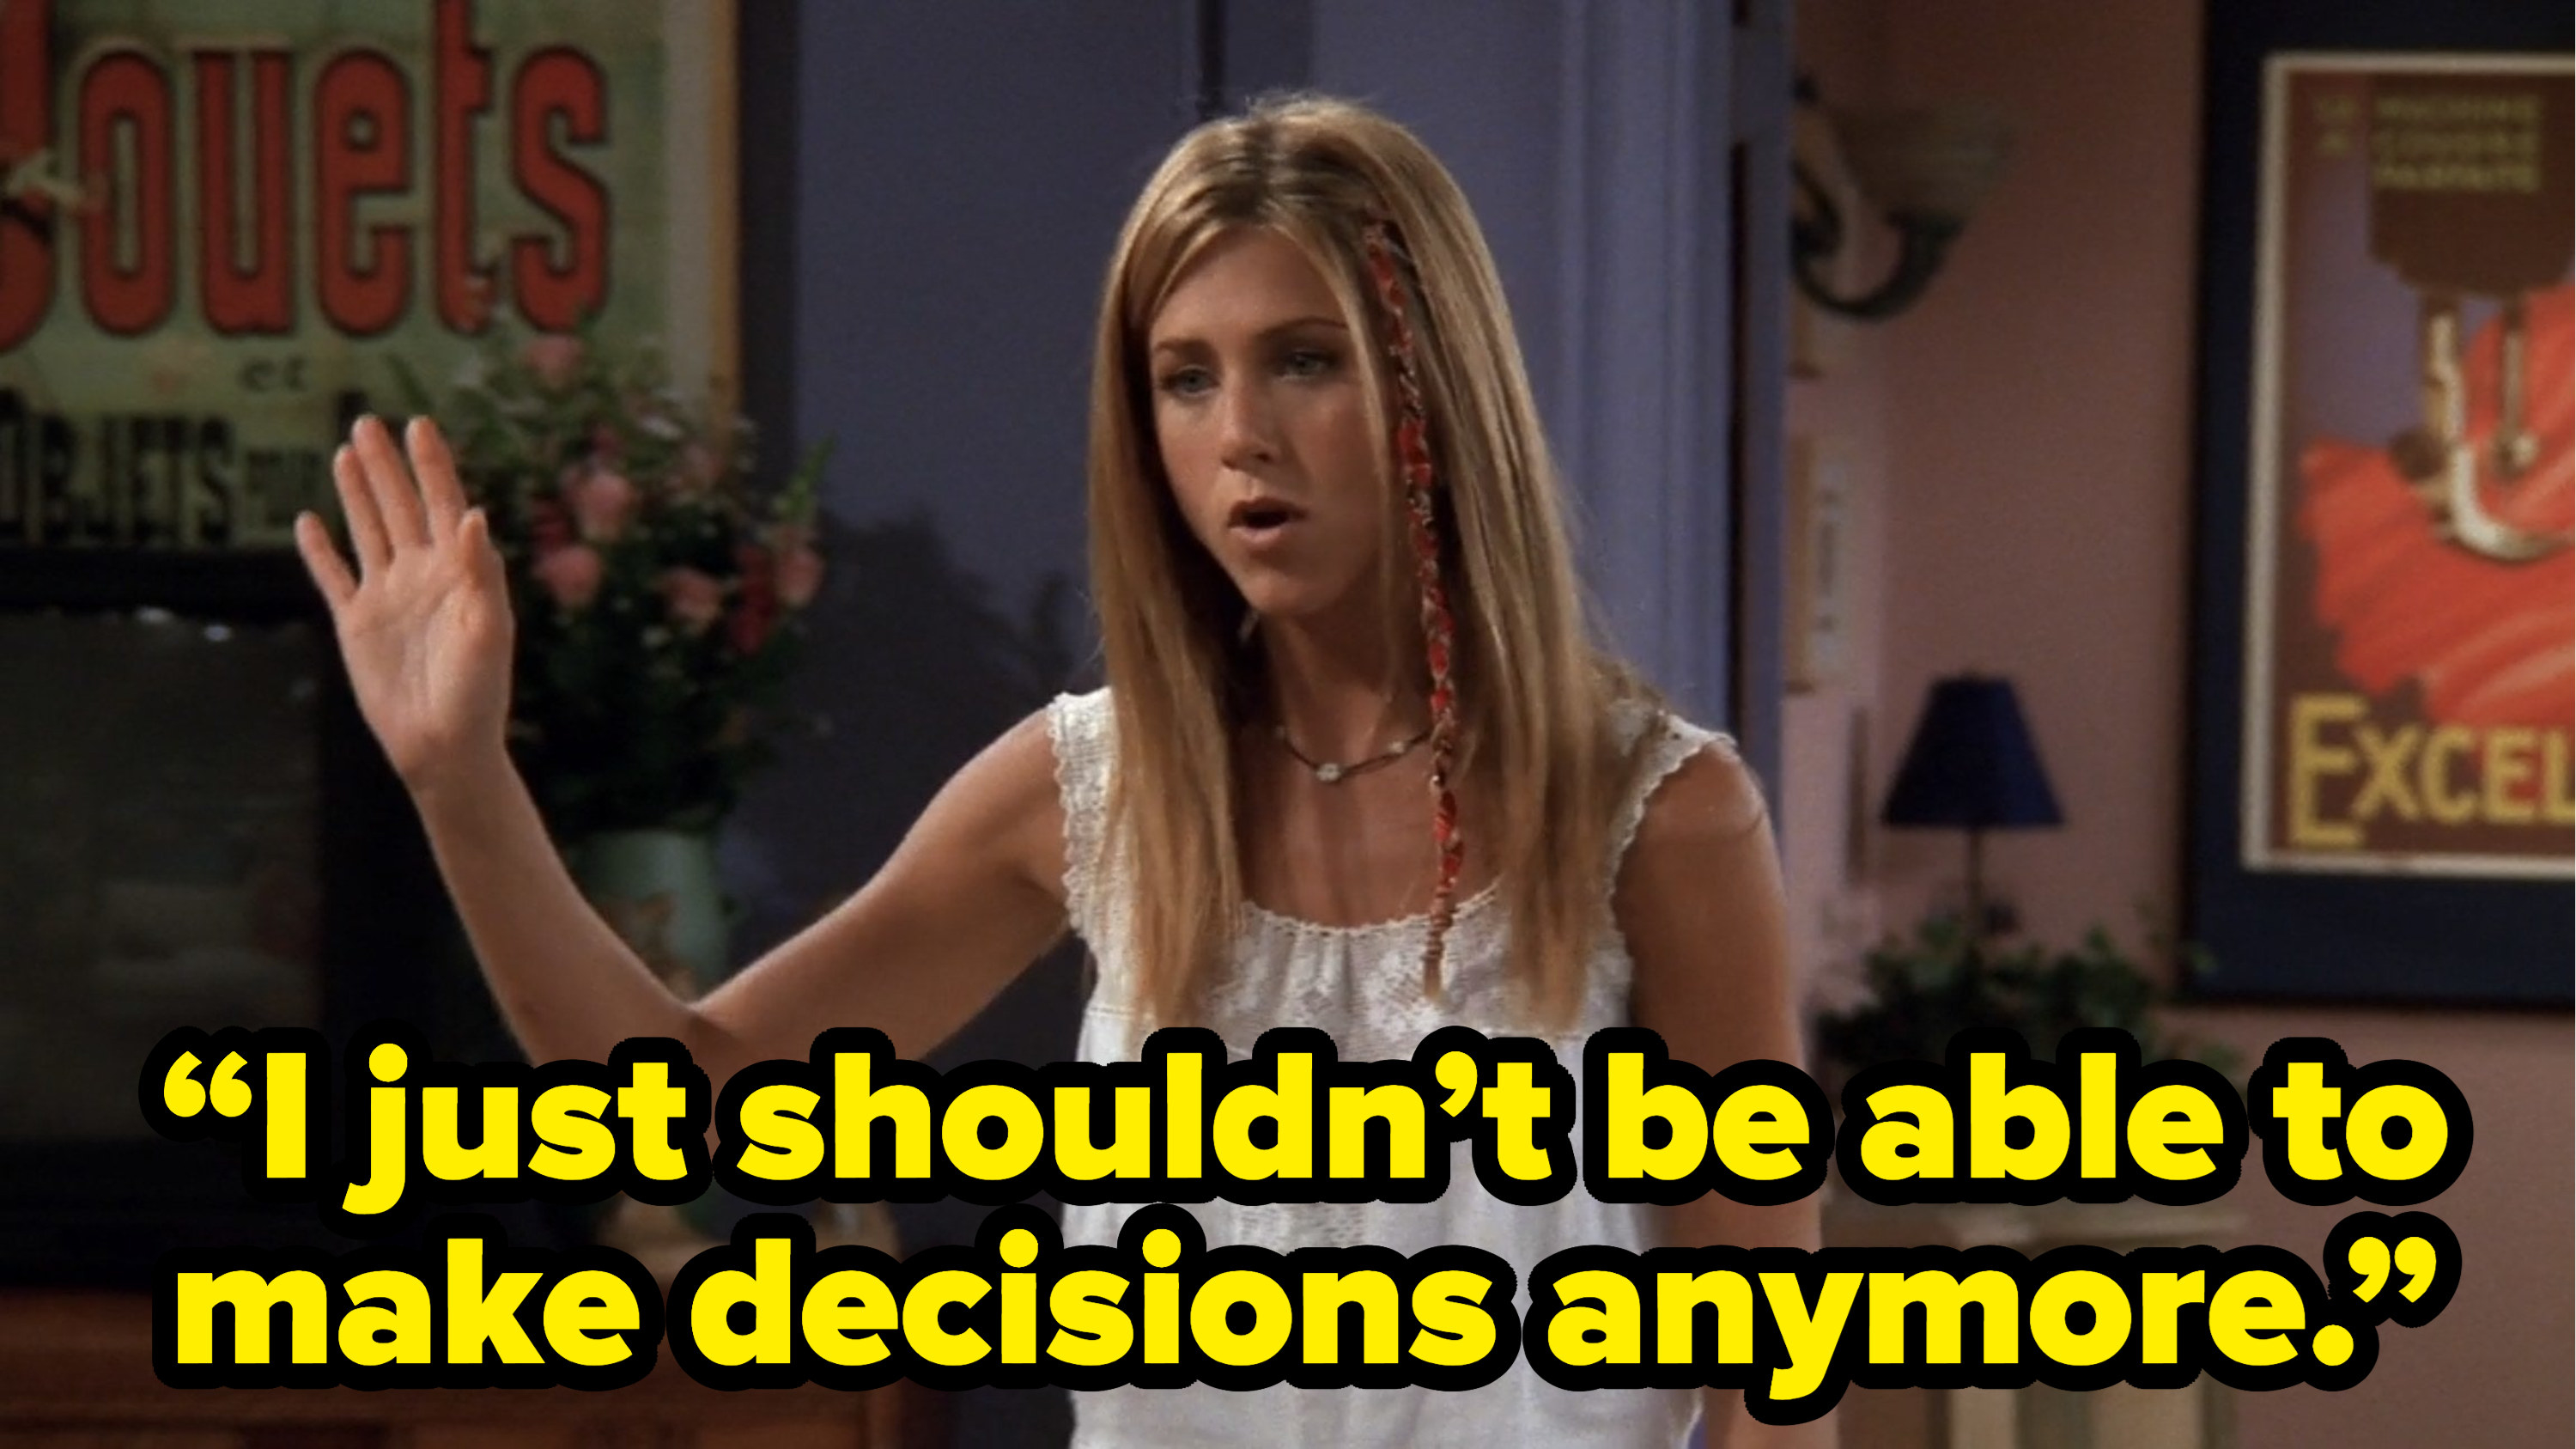 rachel saying “I just shouldn’t be able to make decisions anymore.” on friends